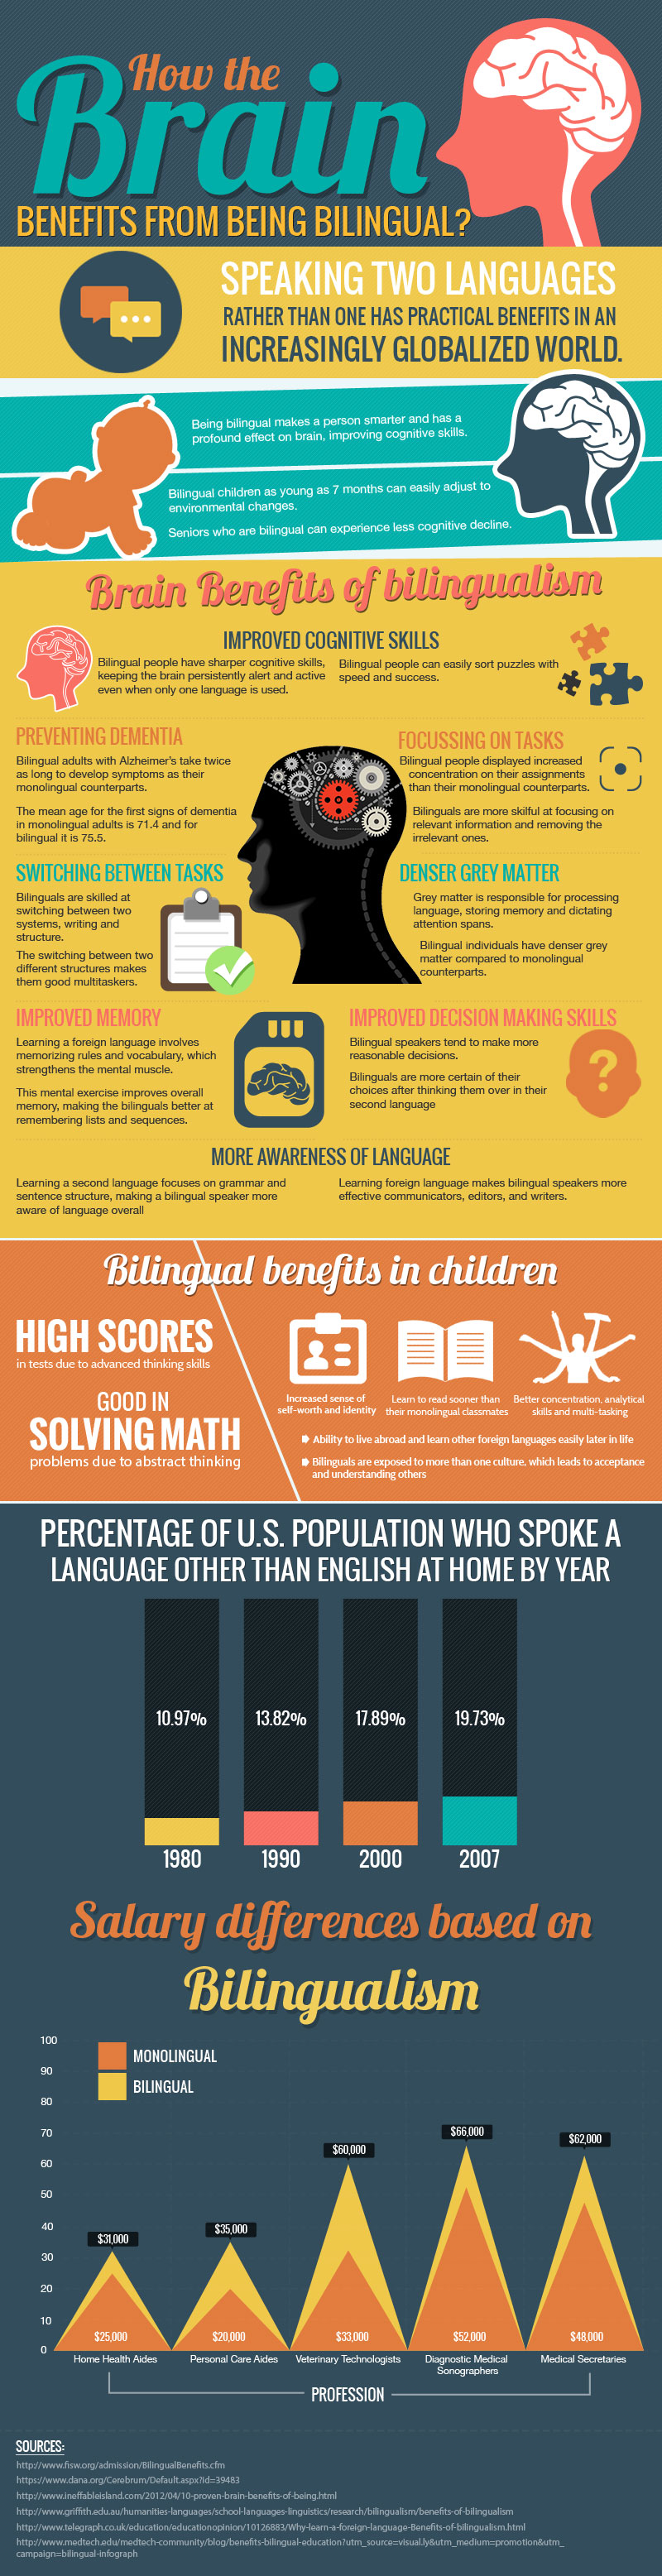 How the Brain Benefits from Being Bilingual